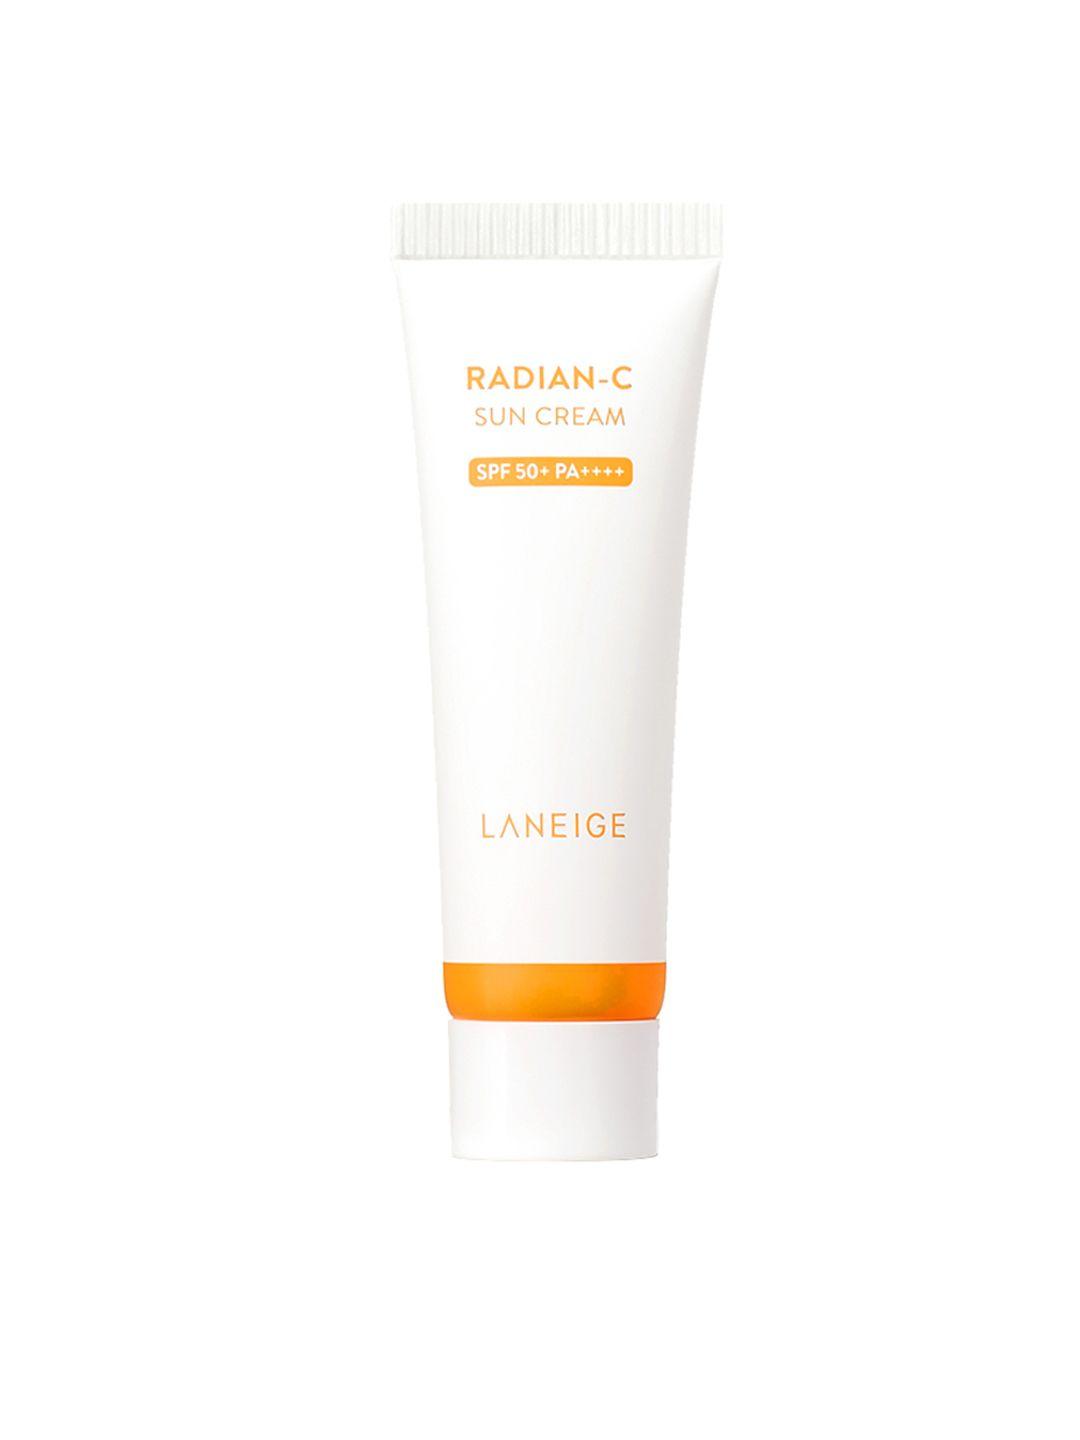 laneige radian-c sun cream with spf50+ pa++++ for blemish control - 50ml